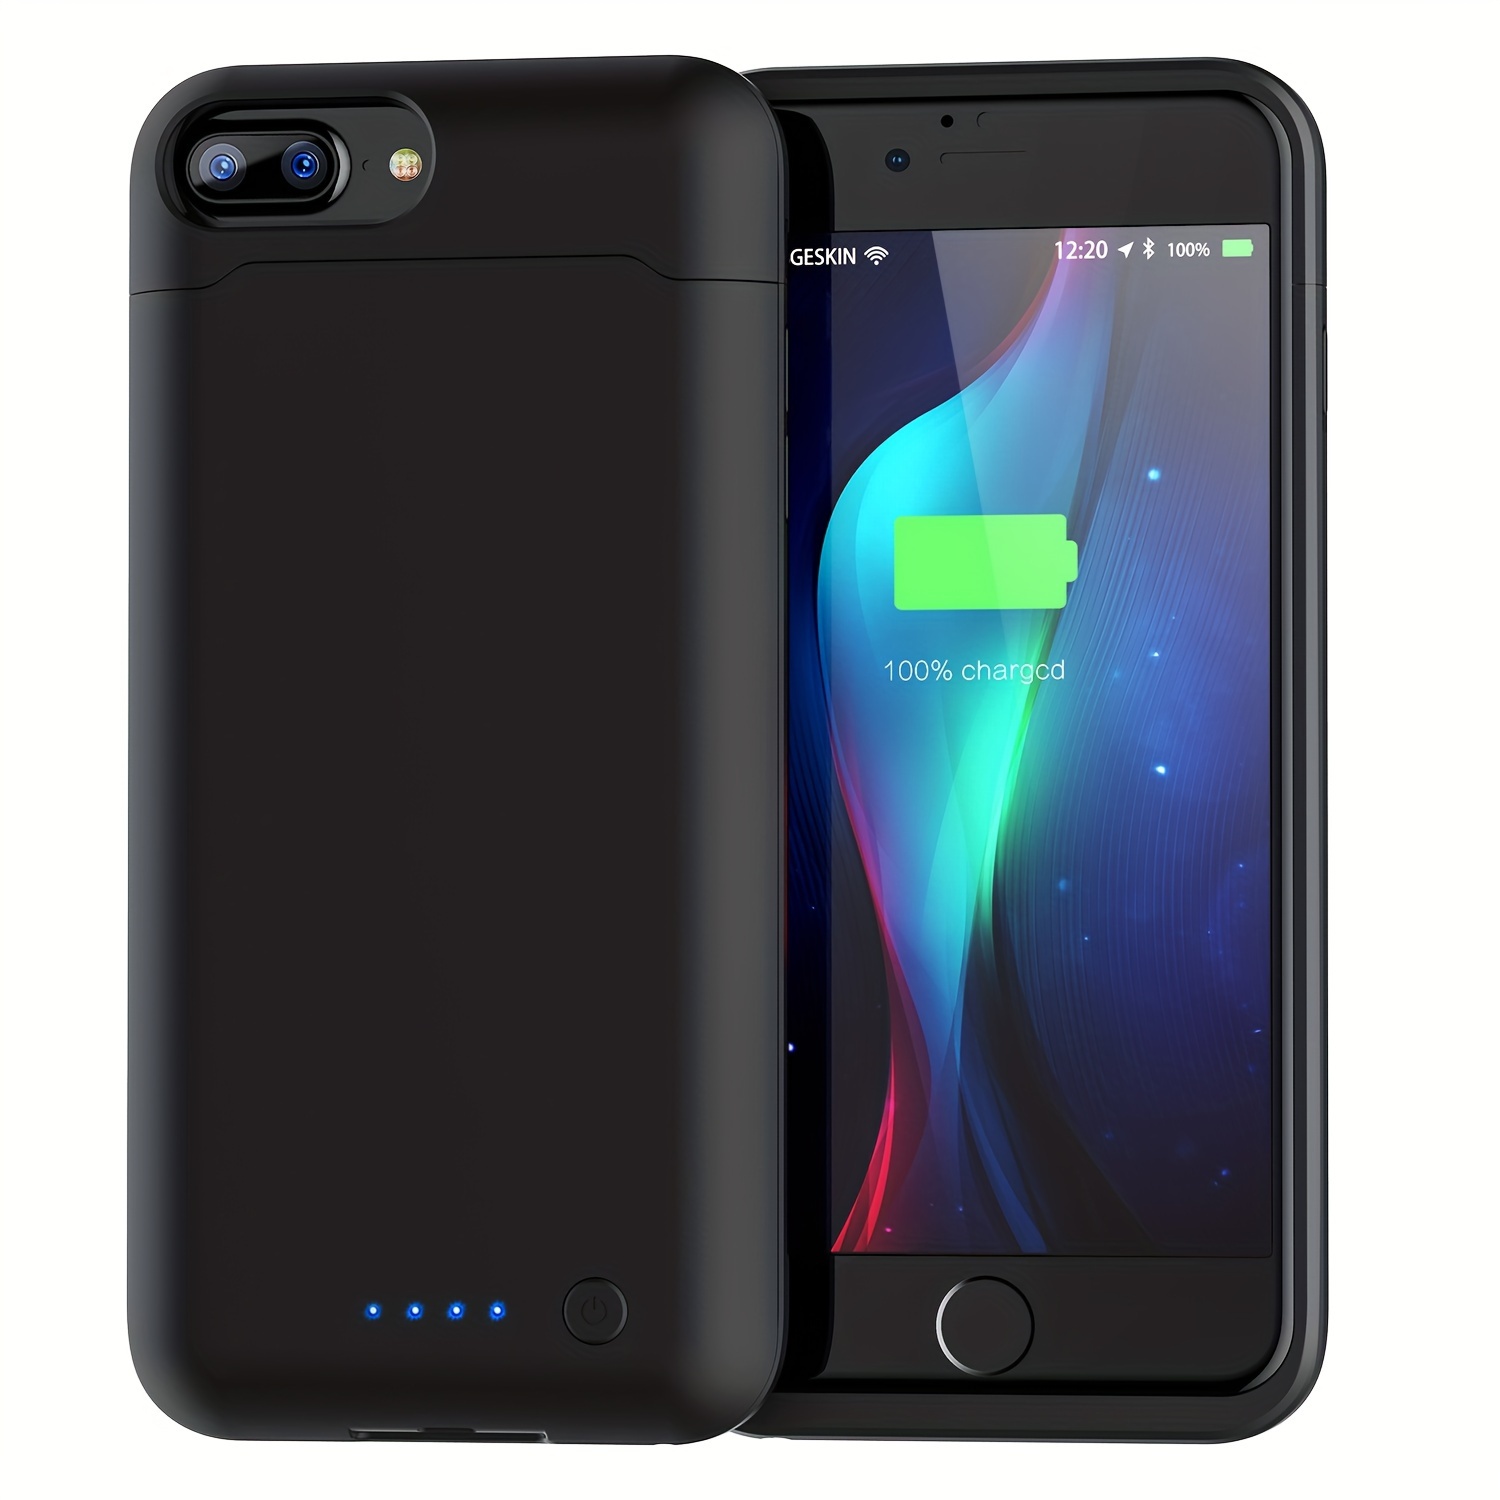 

Battery Case For , New Upgraded Slim Portable Charging Case Protective Rechargeable Battery Pack Portable Charger Case For 7/ 8/ 6 Plus/ 6s Plus/ 7plus/ 8plus